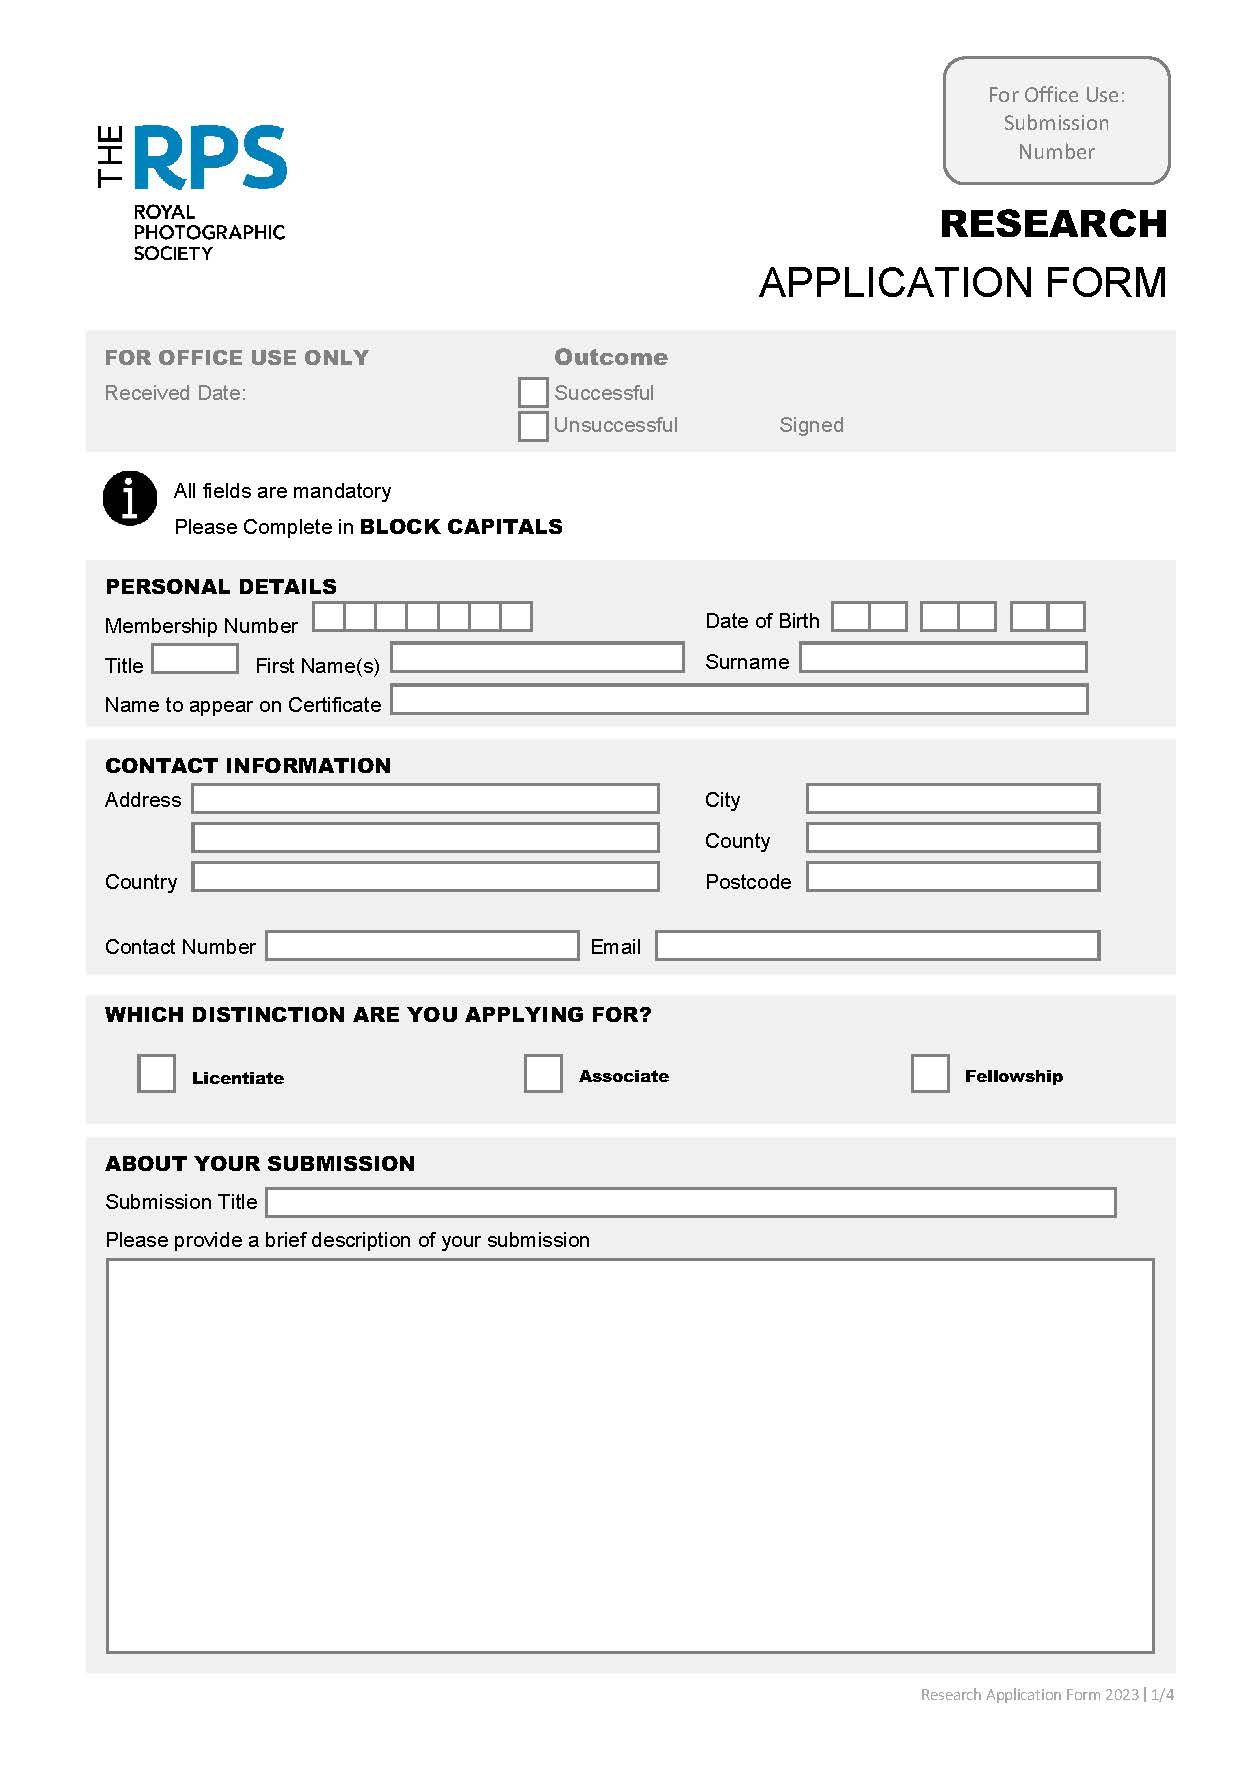 Research Application Form Cover